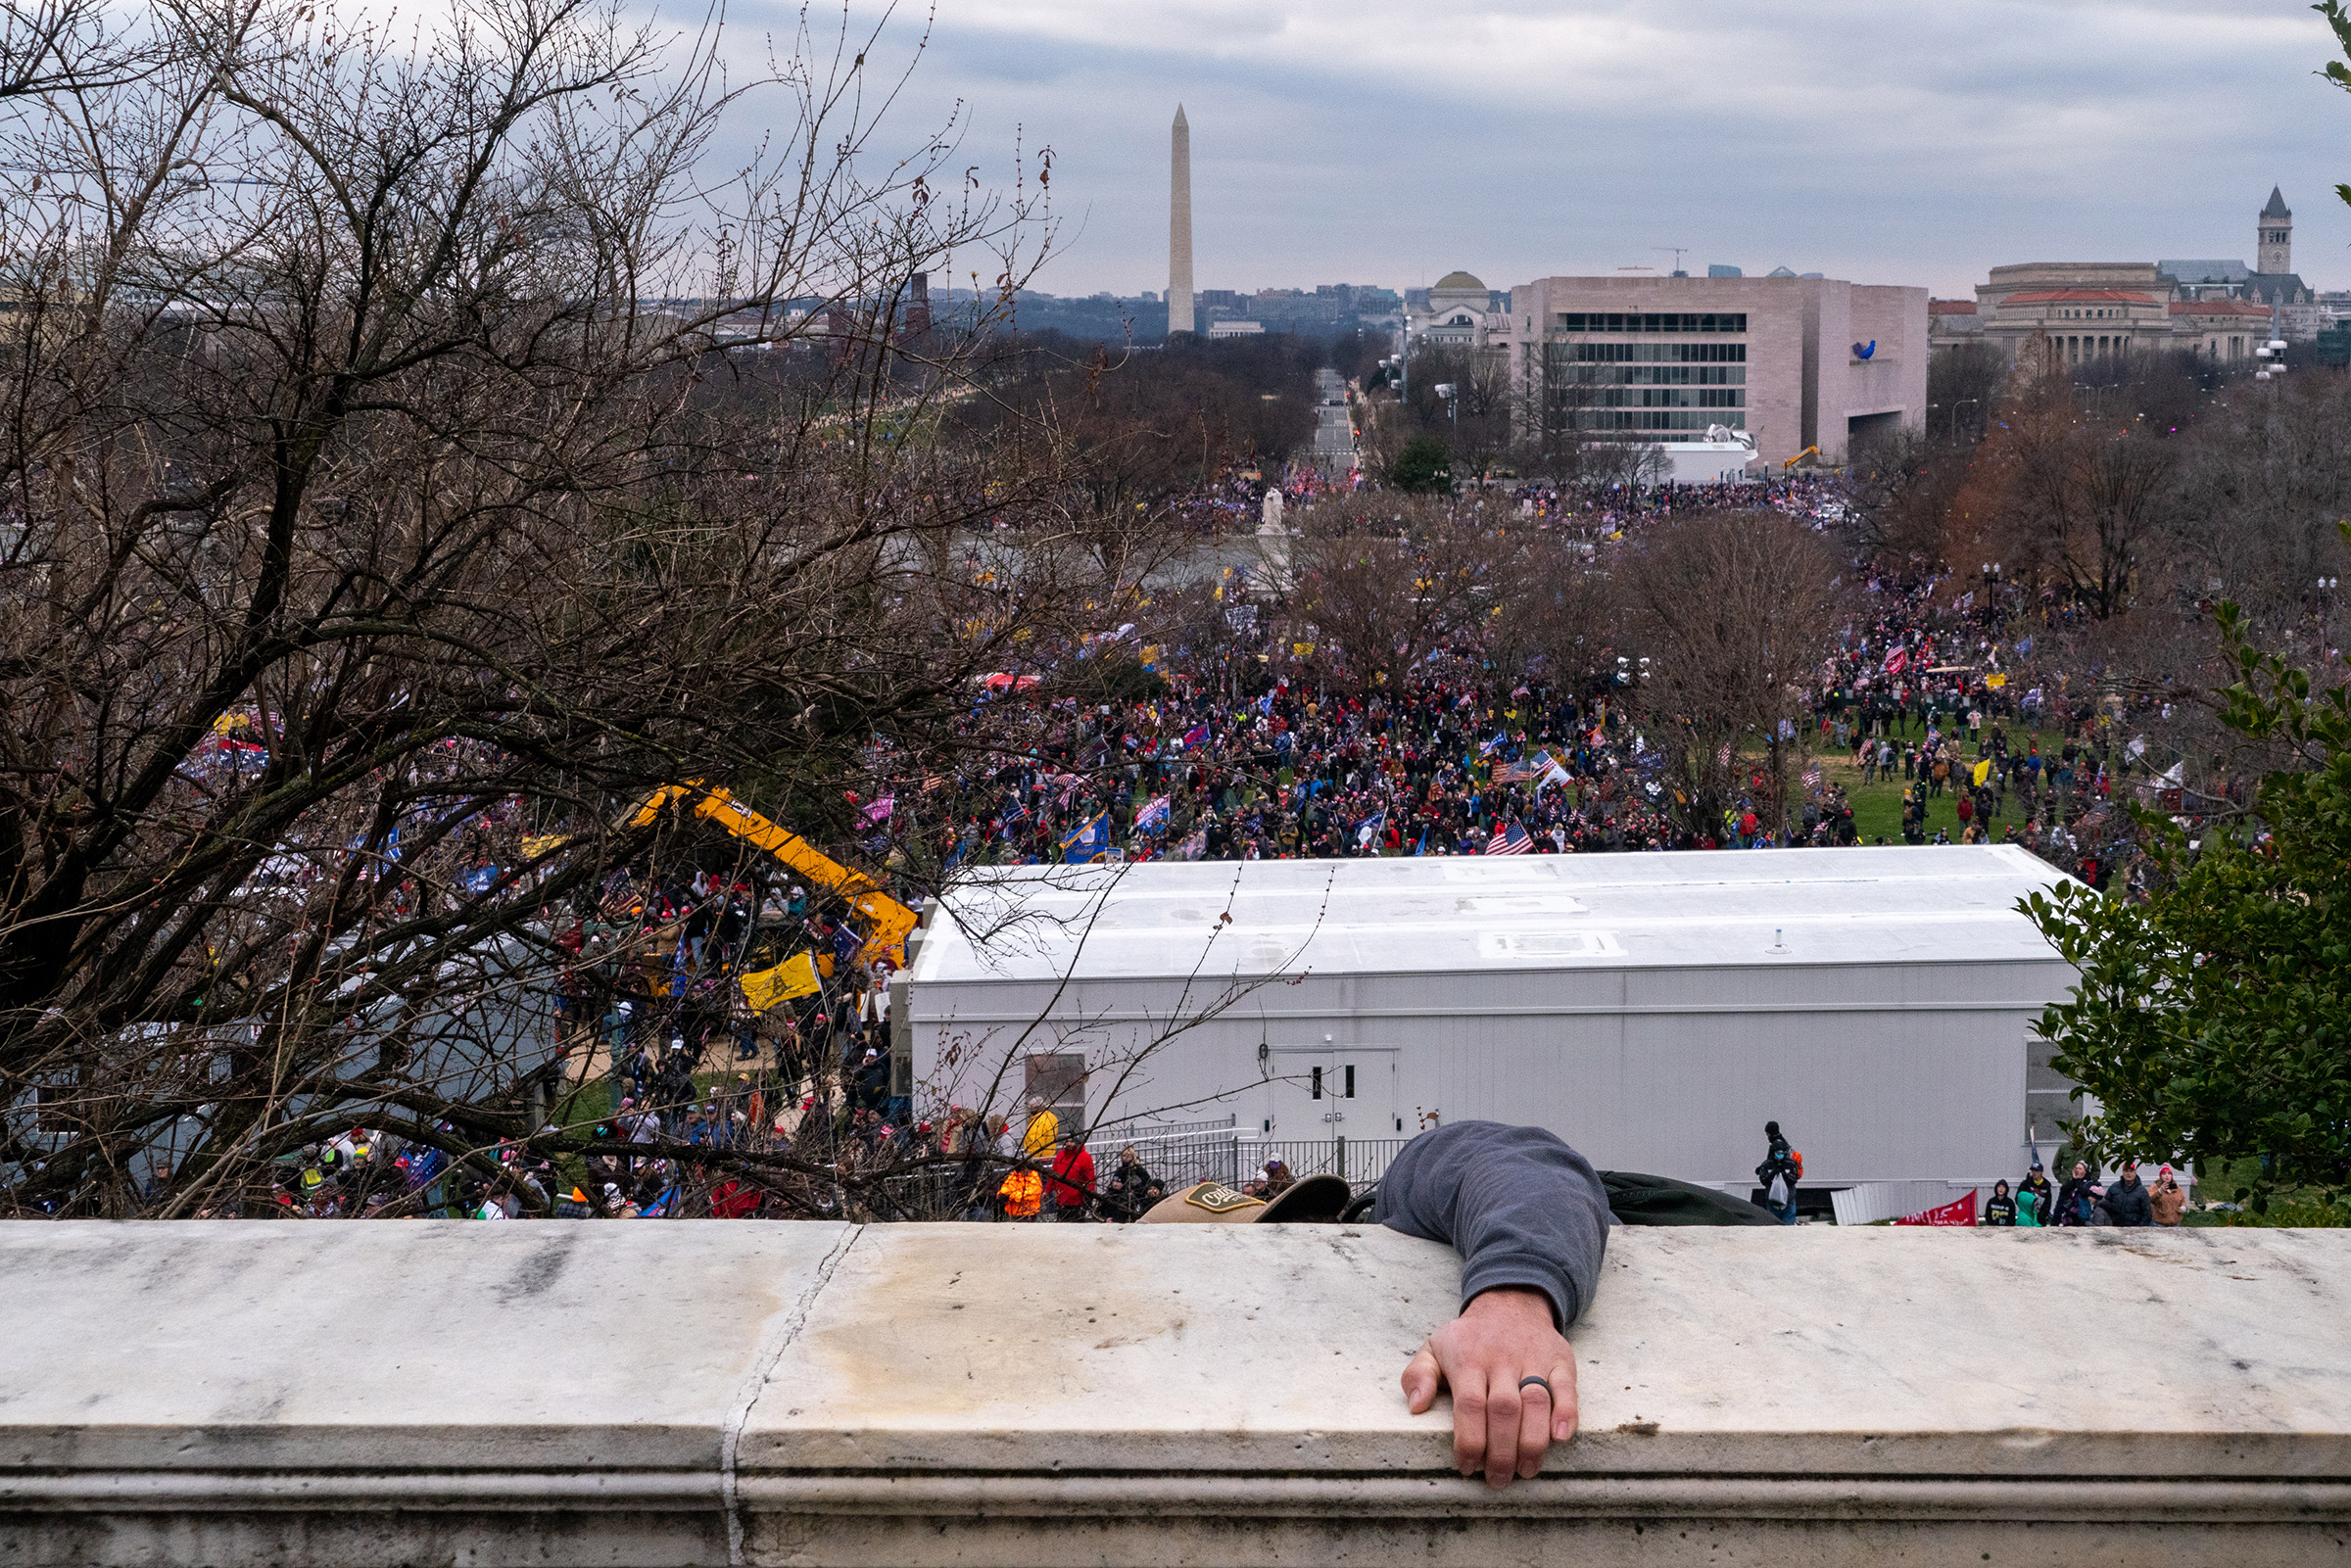 2020.Washington DC. USA. Following an inflammatory speech by President Trump, protestors objecting to the certification of Joe Biden by Congress storm the Capitol. They were briefly blocked by police before gaining entry, and wreaked havoc before being expelled with few arrests. One protestor was shot and killed.